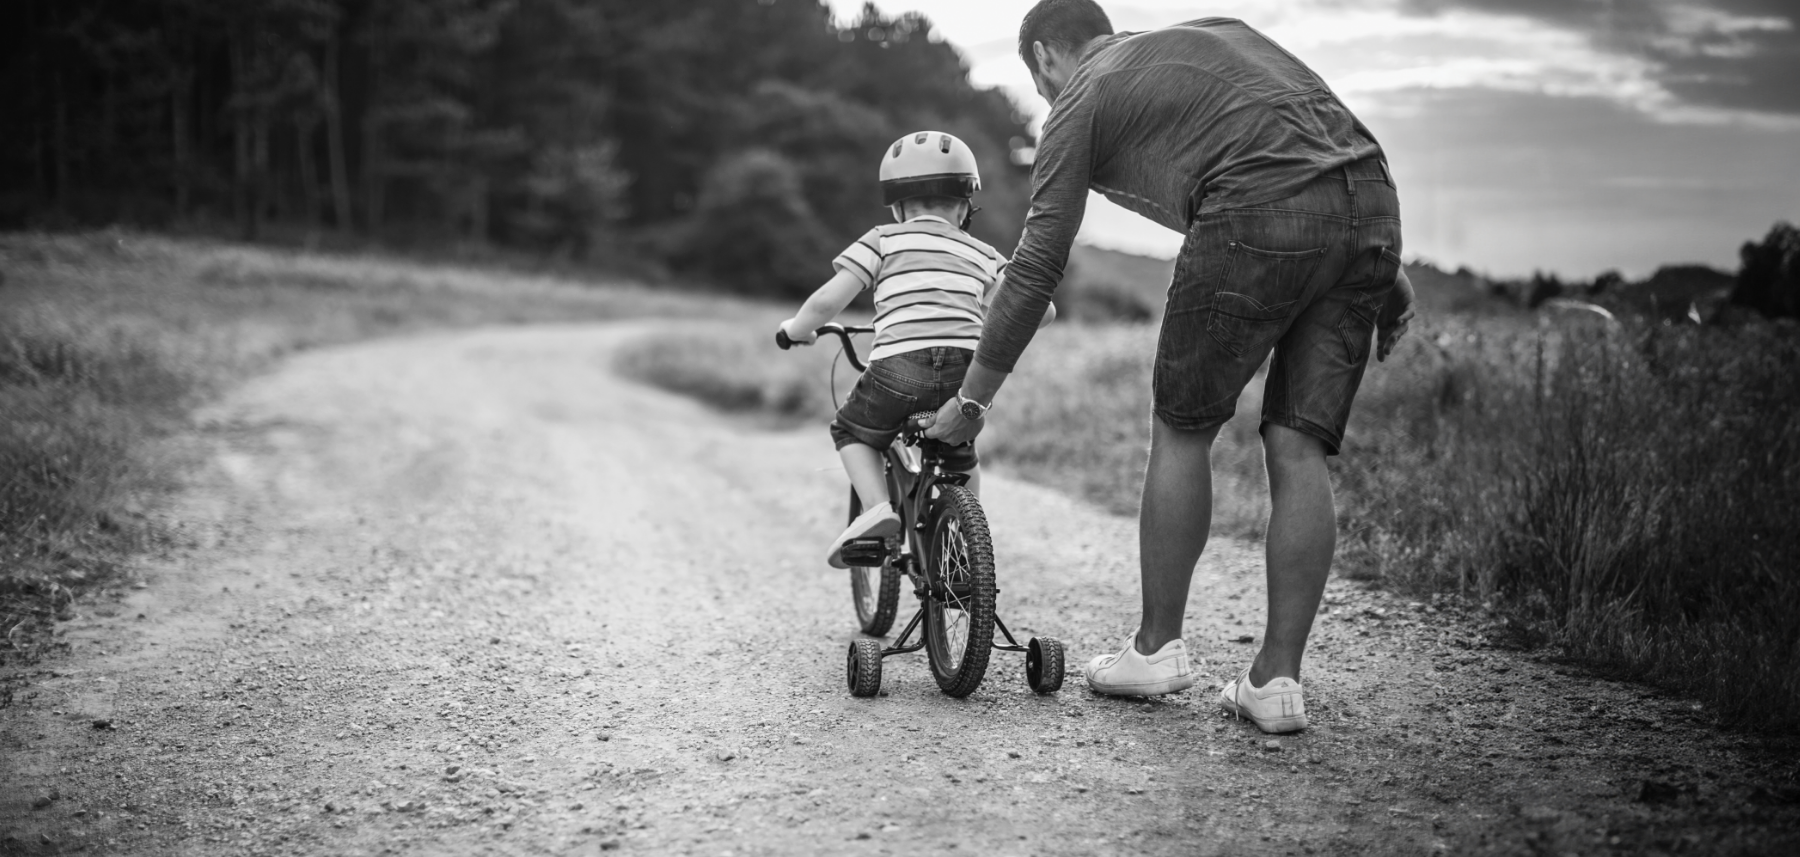 A man and a child riding a bicycle on a dirt road.